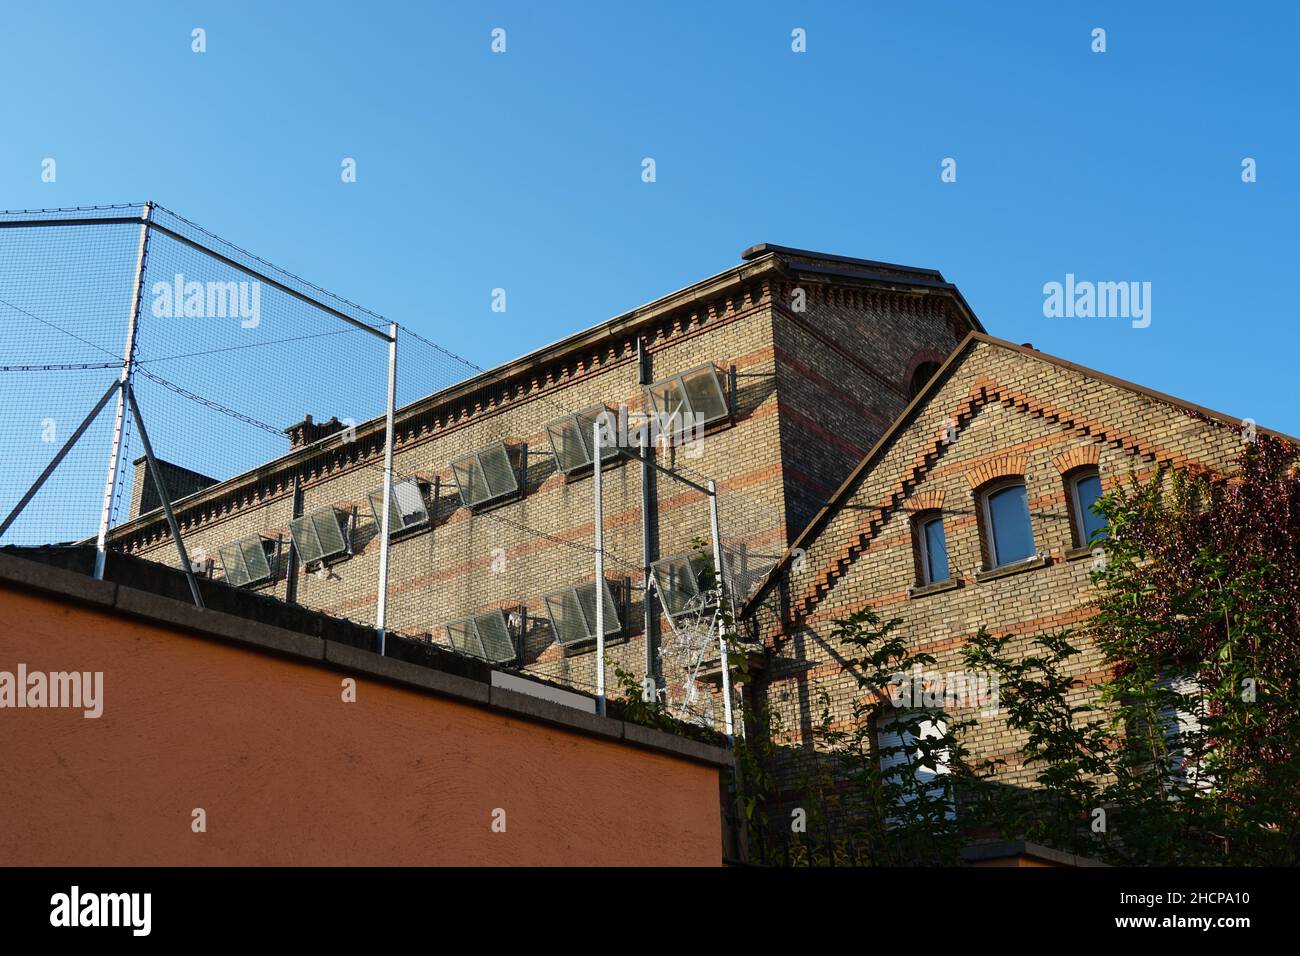 Former penitentiary or prison building surrounded by high walls and security net. Stock Photo